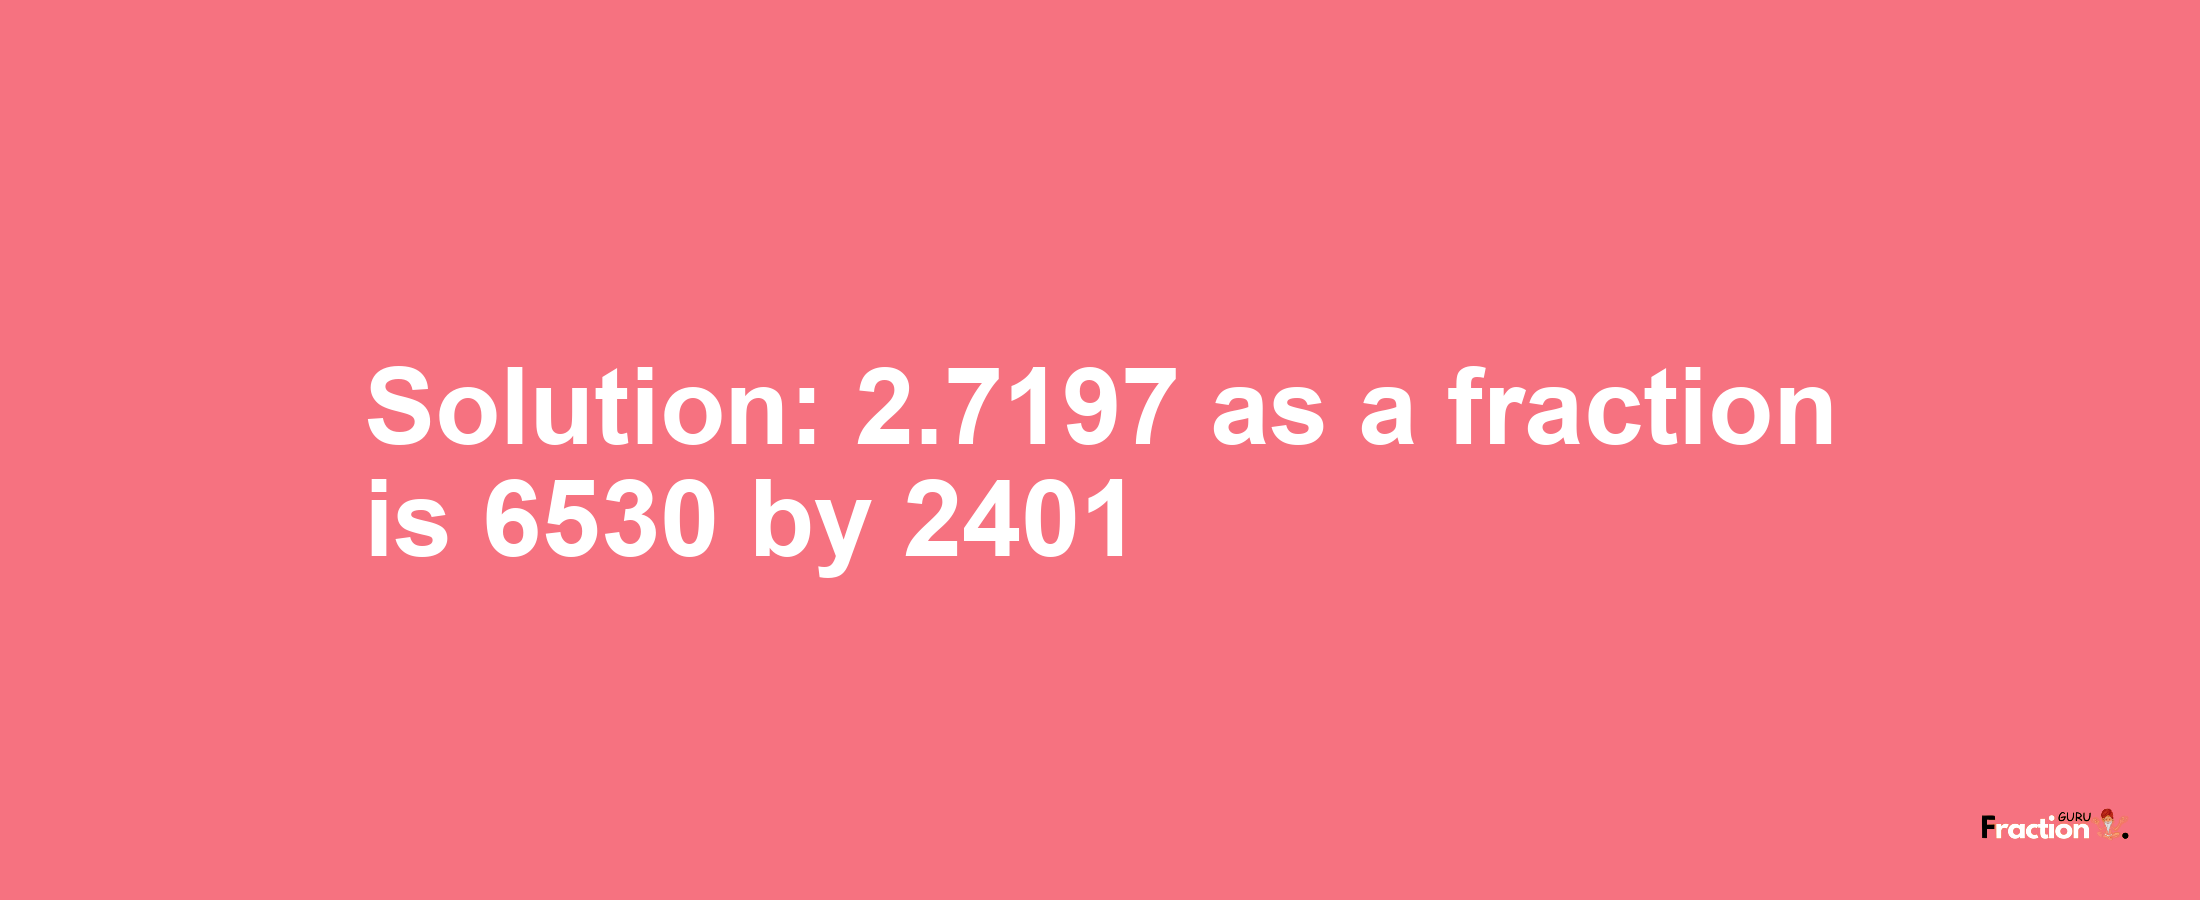 Solution:2.7197 as a fraction is 6530/2401